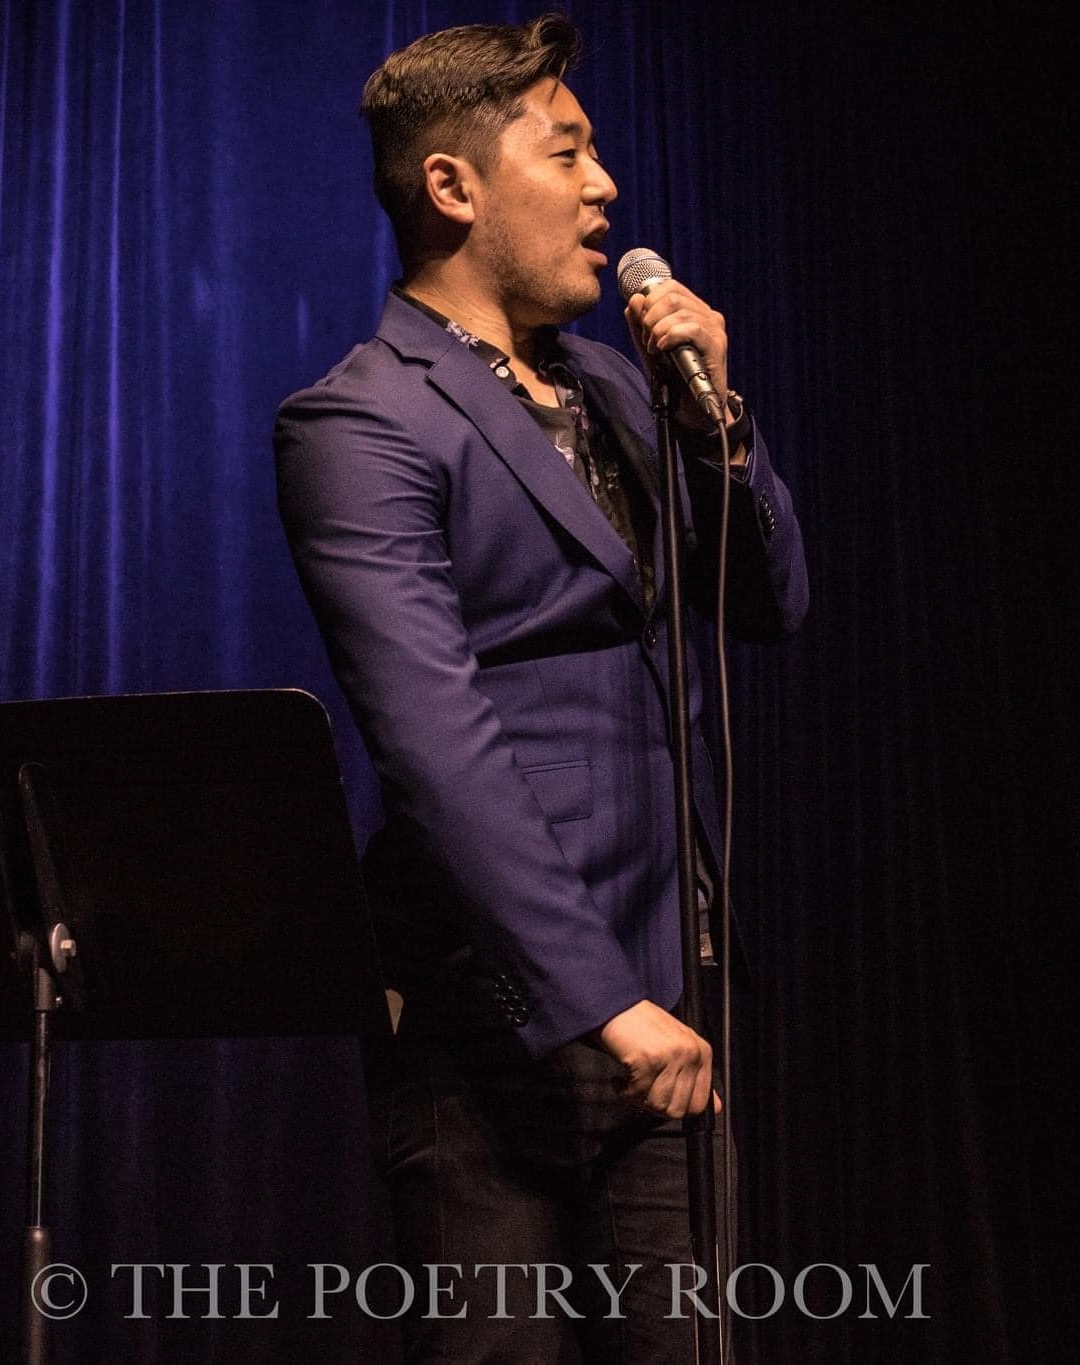 Side view of man in blue suit with old style mic in front of blue stage curtain.